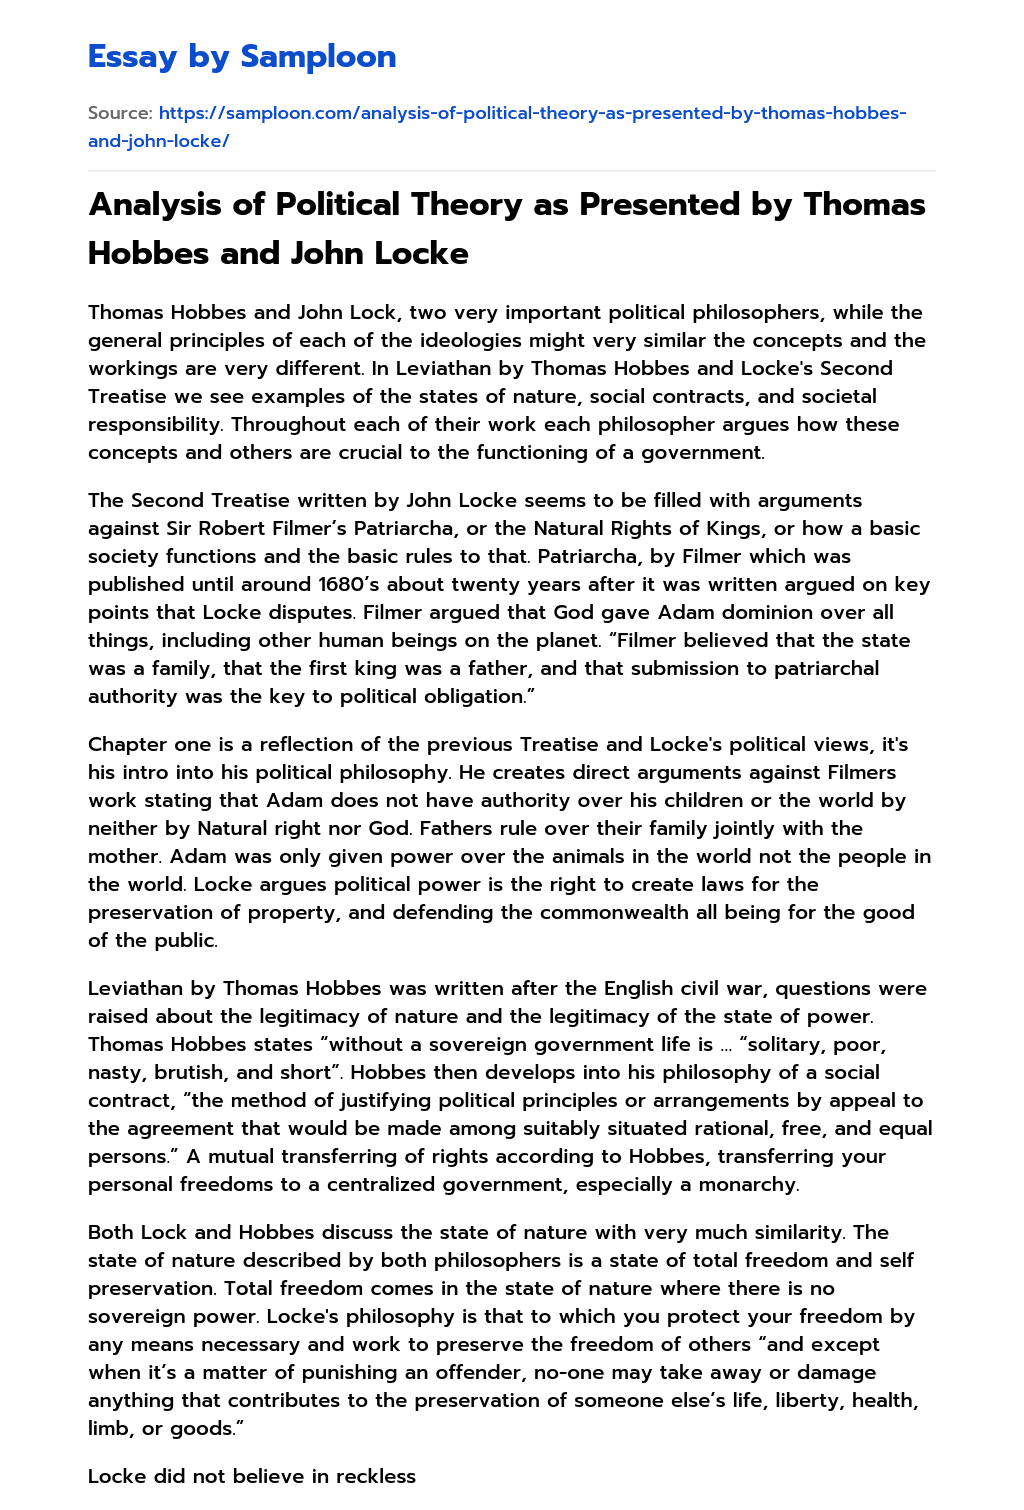 Analysis of Political Theory as Presented by Thomas Hobbes and John Locke essay